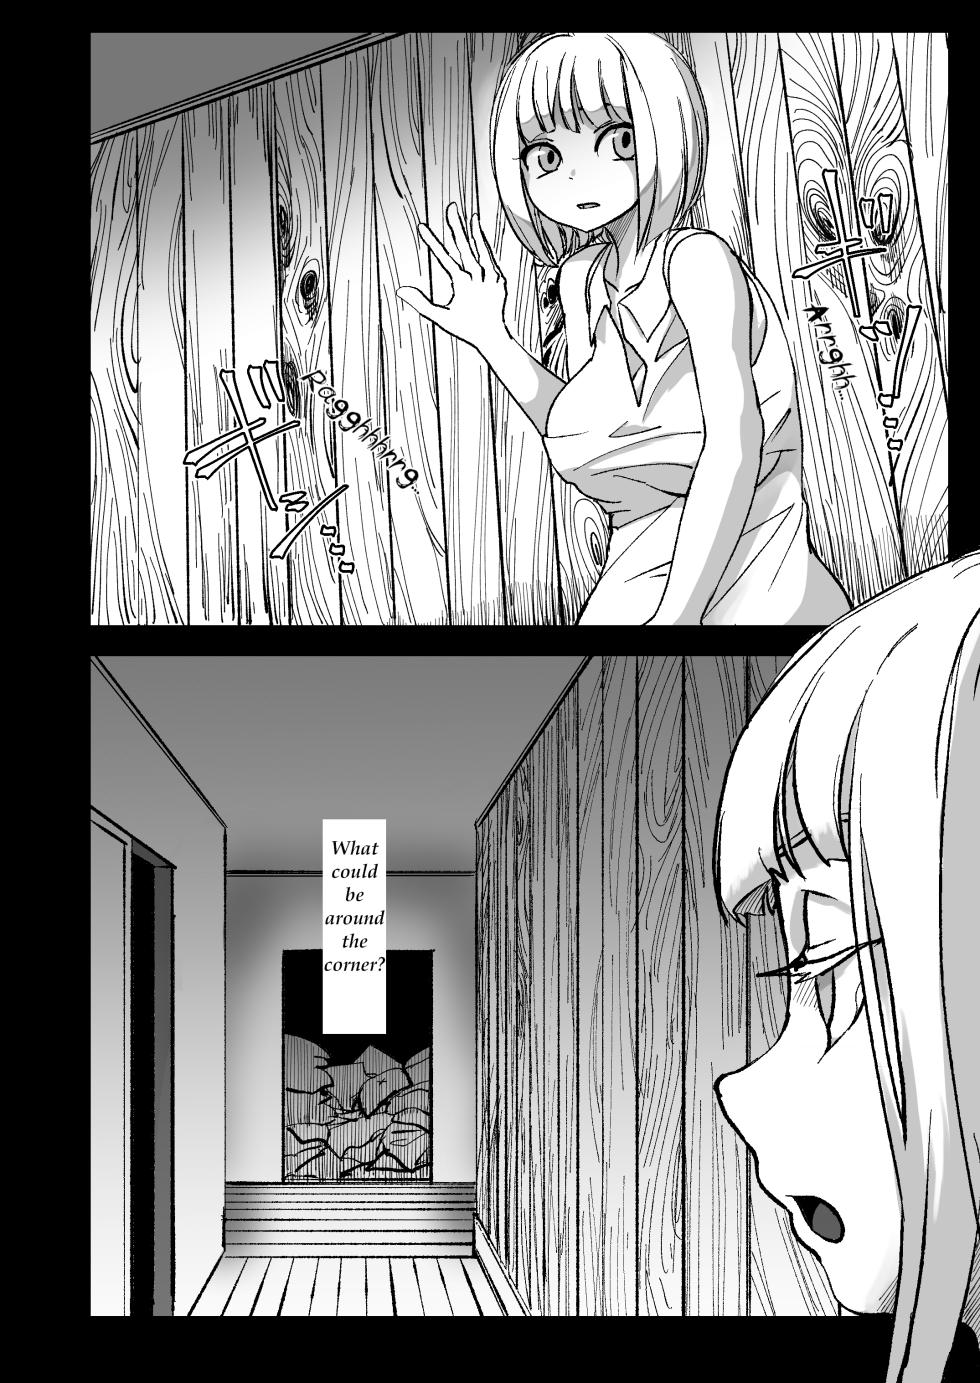 [Shimanami (Archipelago)] Dead End House Anthology - (The Chandelier/1.5/The Exorcist/Spinoff Expansions/Rubber Downfall) [Ongoing] - Page 6